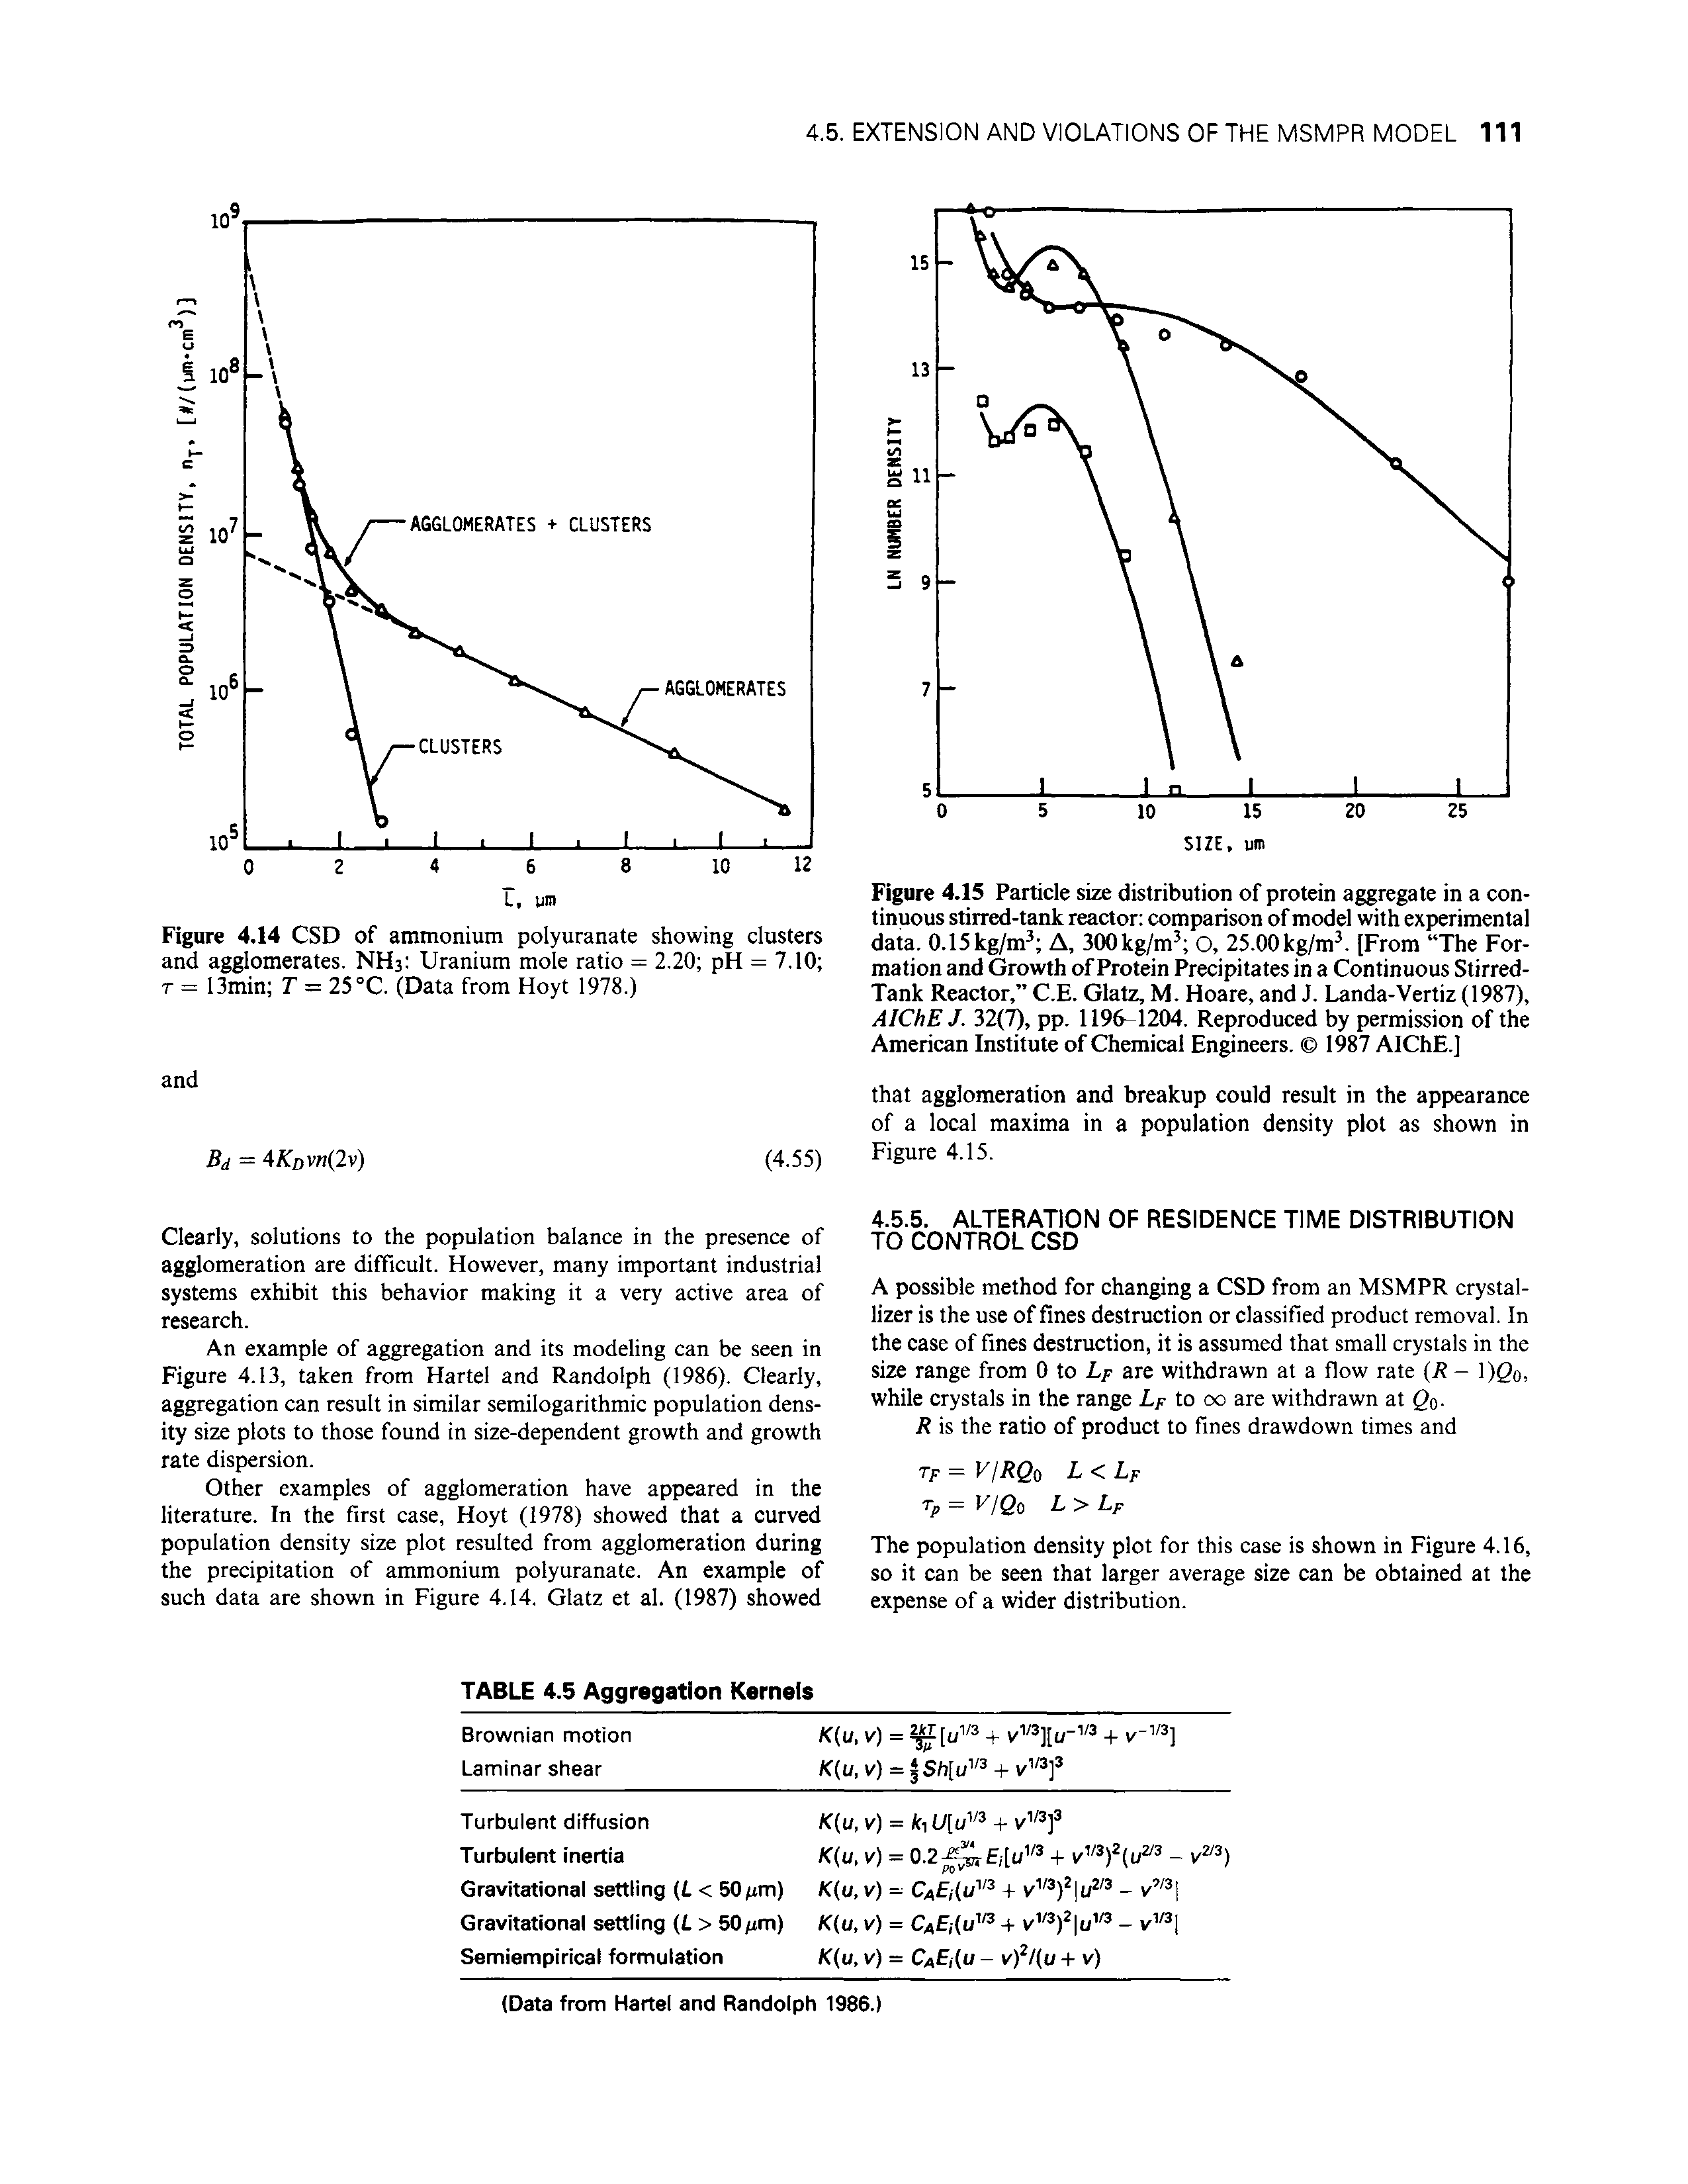 Figure 4.15 Particle size distribution of protein aggregate in a continuous stirred-tank reactor comparison of model with experimental data. 0.15kg/m A, 300kg/m O, 25.00kg/m. [From The Formation and Growth of Protein Precipitates in a Continuous Stirred-Tank Reactor, C.E. Glatz, M. Hoare, and J. Landa-Vertiz (1987), AIChE J. 32(7), pp. 1196-1204. Reproduced by permission of the American Institute of Chemical Engineers. 1987 AIChE.]...